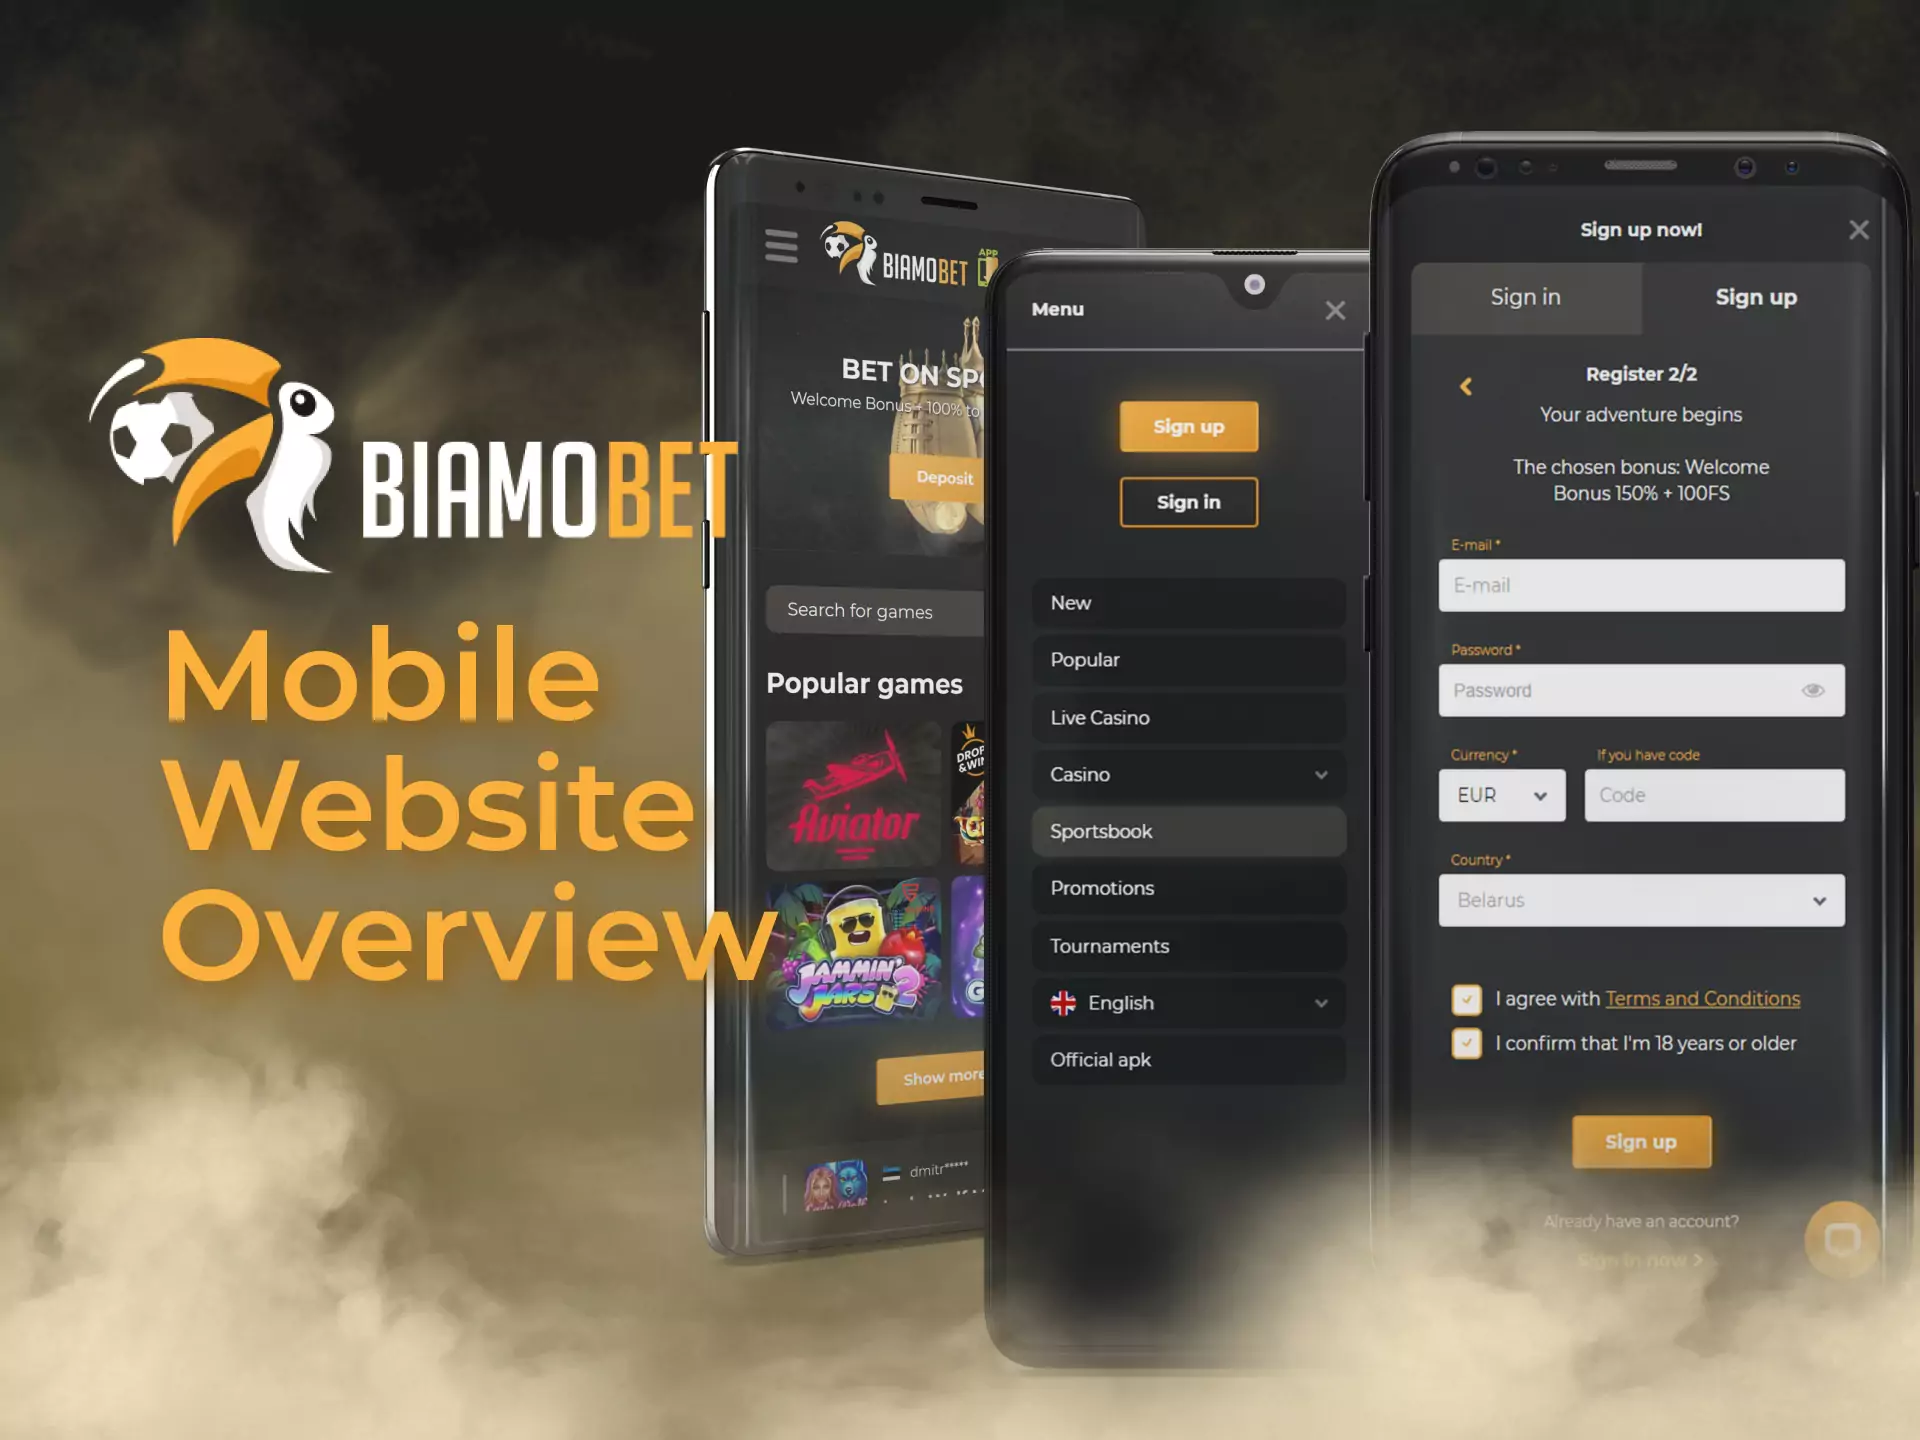 Besides apps, you can place bets on the Biamobet mobile website.